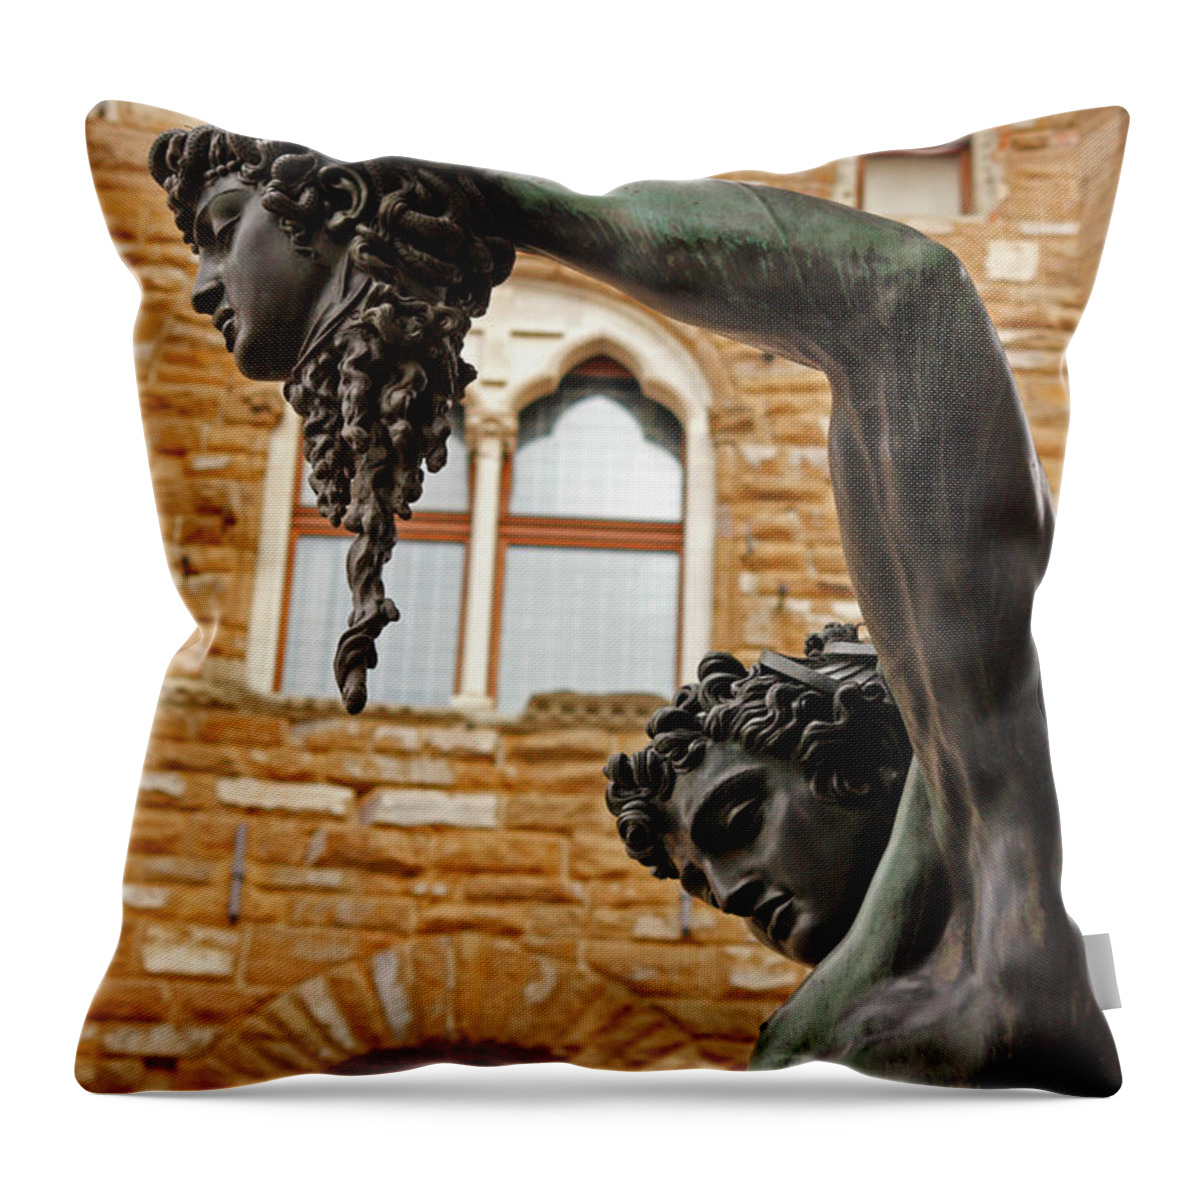 Arch Throw Pillow featuring the photograph Statue Of Perseus Holding The Head Of by Trish Punch / Design Pics